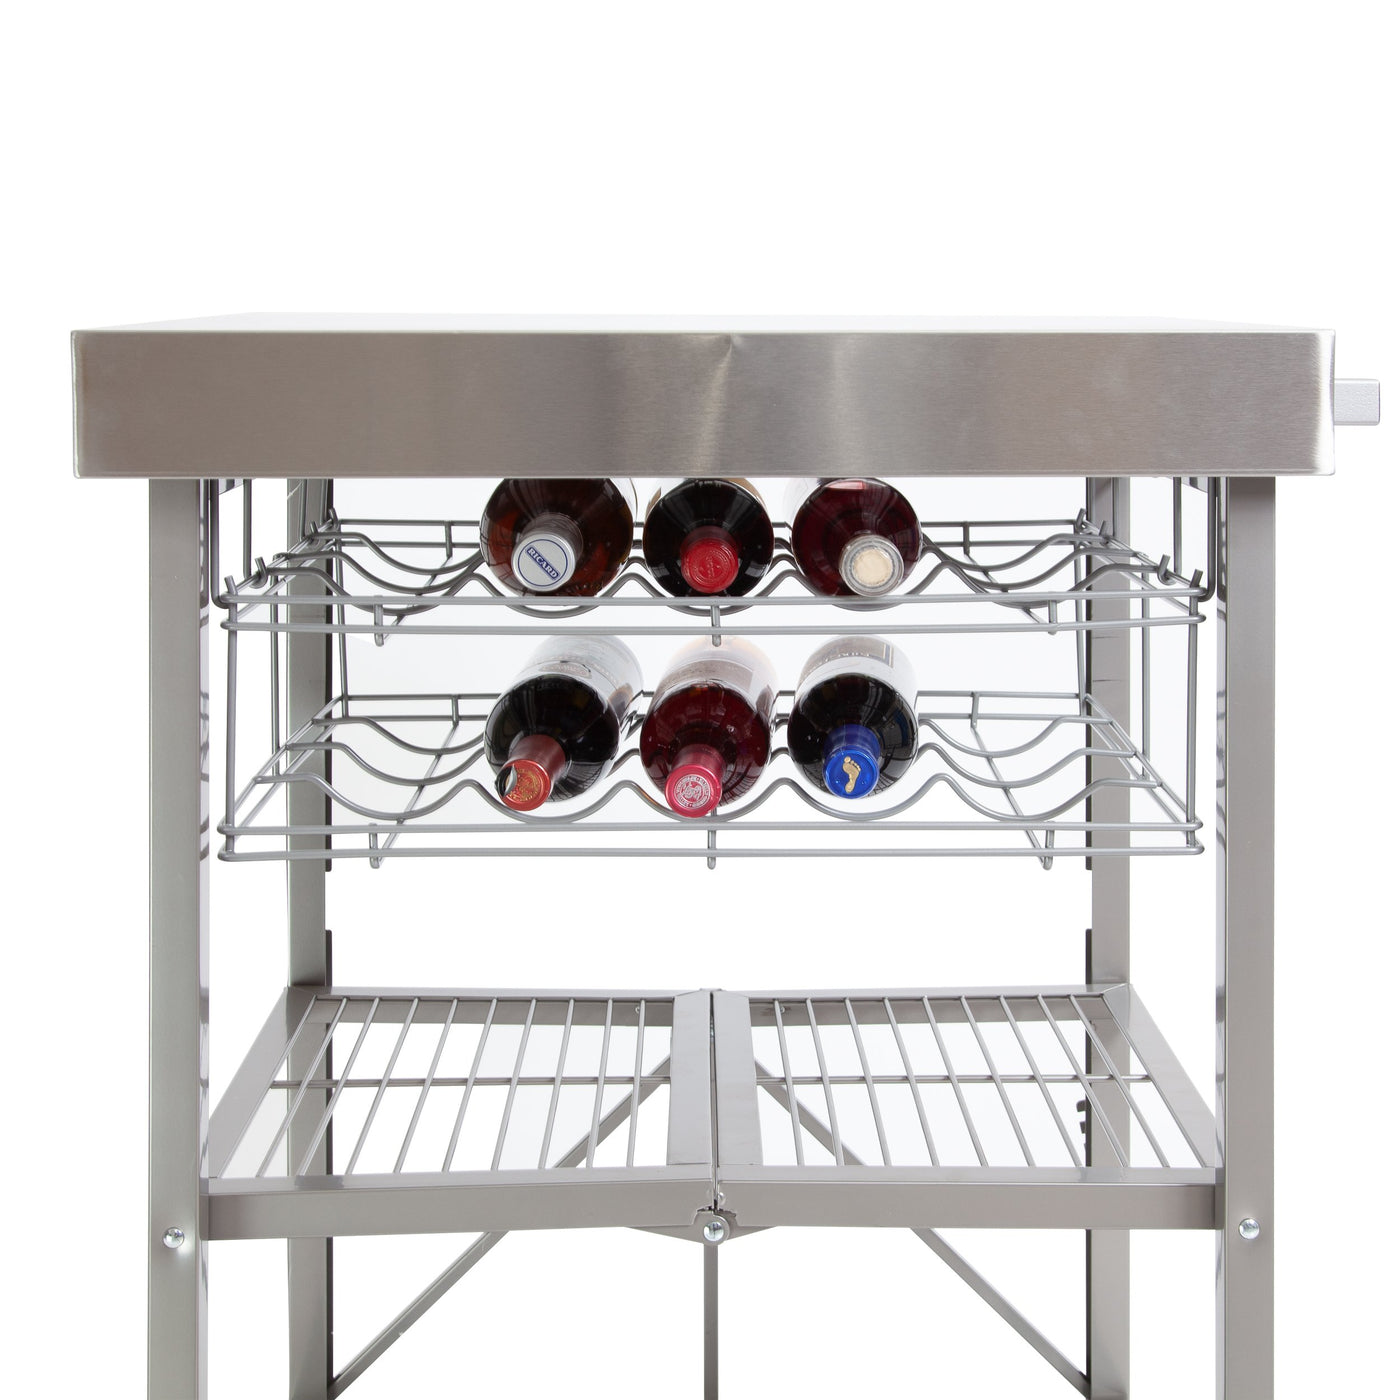 Origami Stainless Steel Kitchen Island Cart with Wheels [OB]